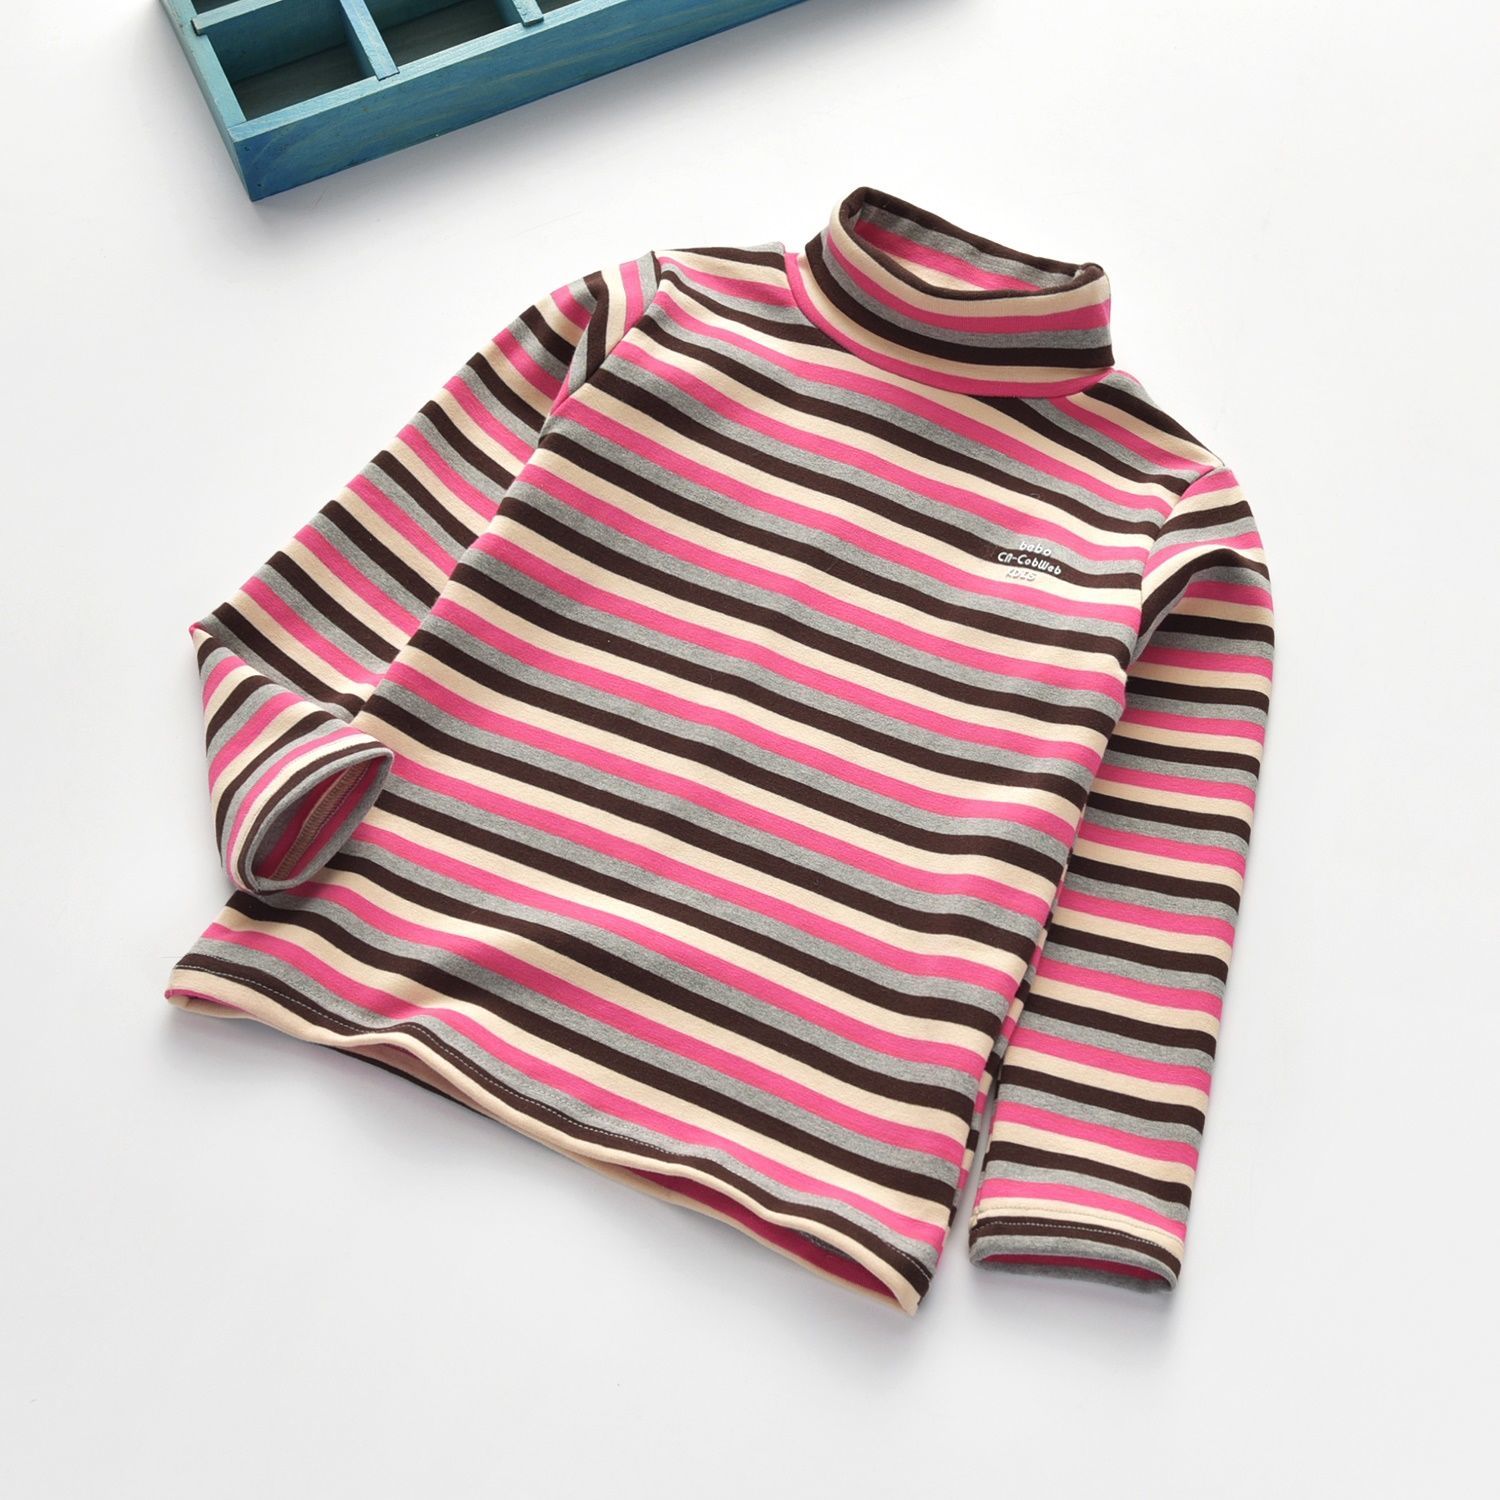 Children's thickened warm bottoming shirt baby brushed striped T-shirt autumn and winter children's all-match long-sleeved top pure cotton